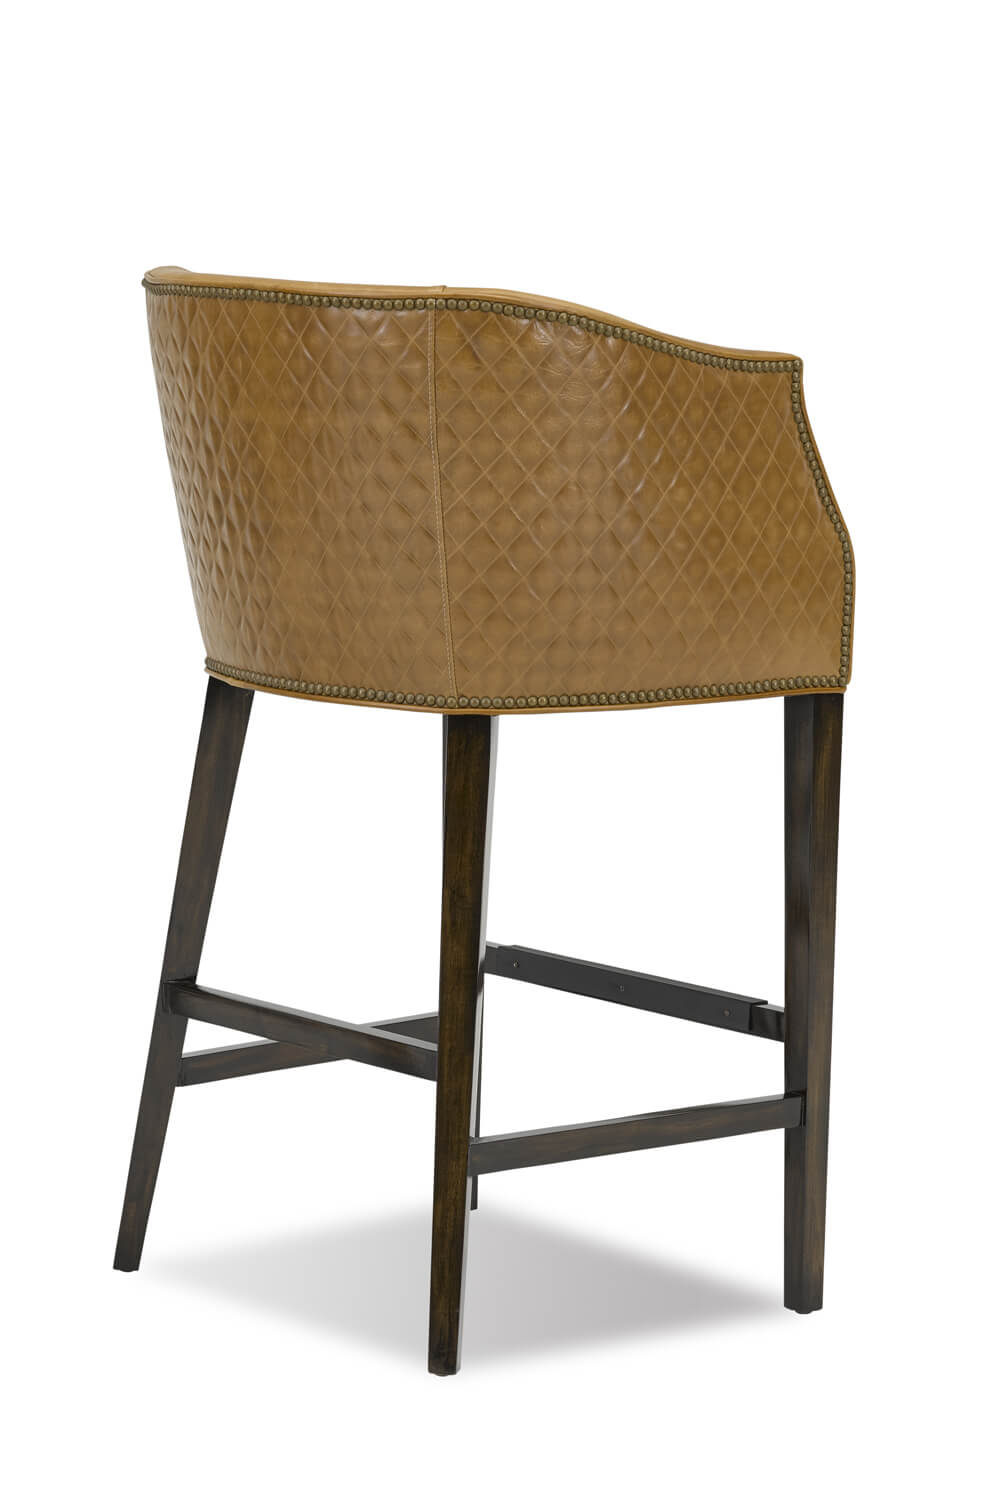 Leathercraft's Baxter Luxury Wood Bar Stool with Nailhead Trim and Curved Back - Back Side